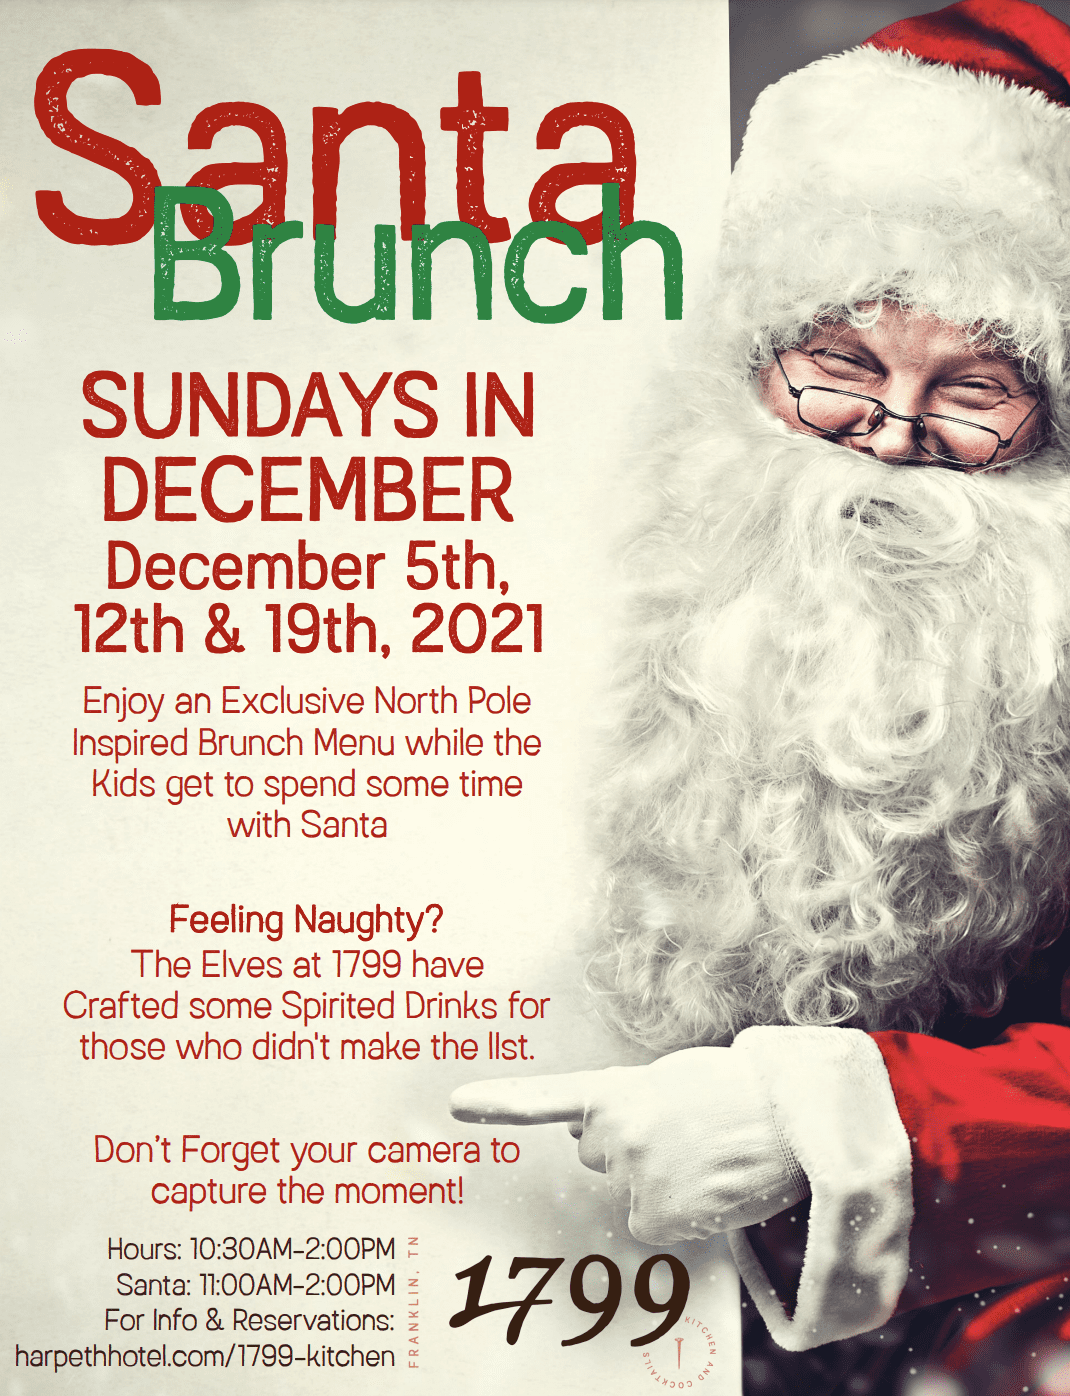 Santa Brunch in downtown Franklin, TN at the Harpeth Hotel, enjoy a North Pole inspired brunch menu while the kids get to spend some time with Santa.